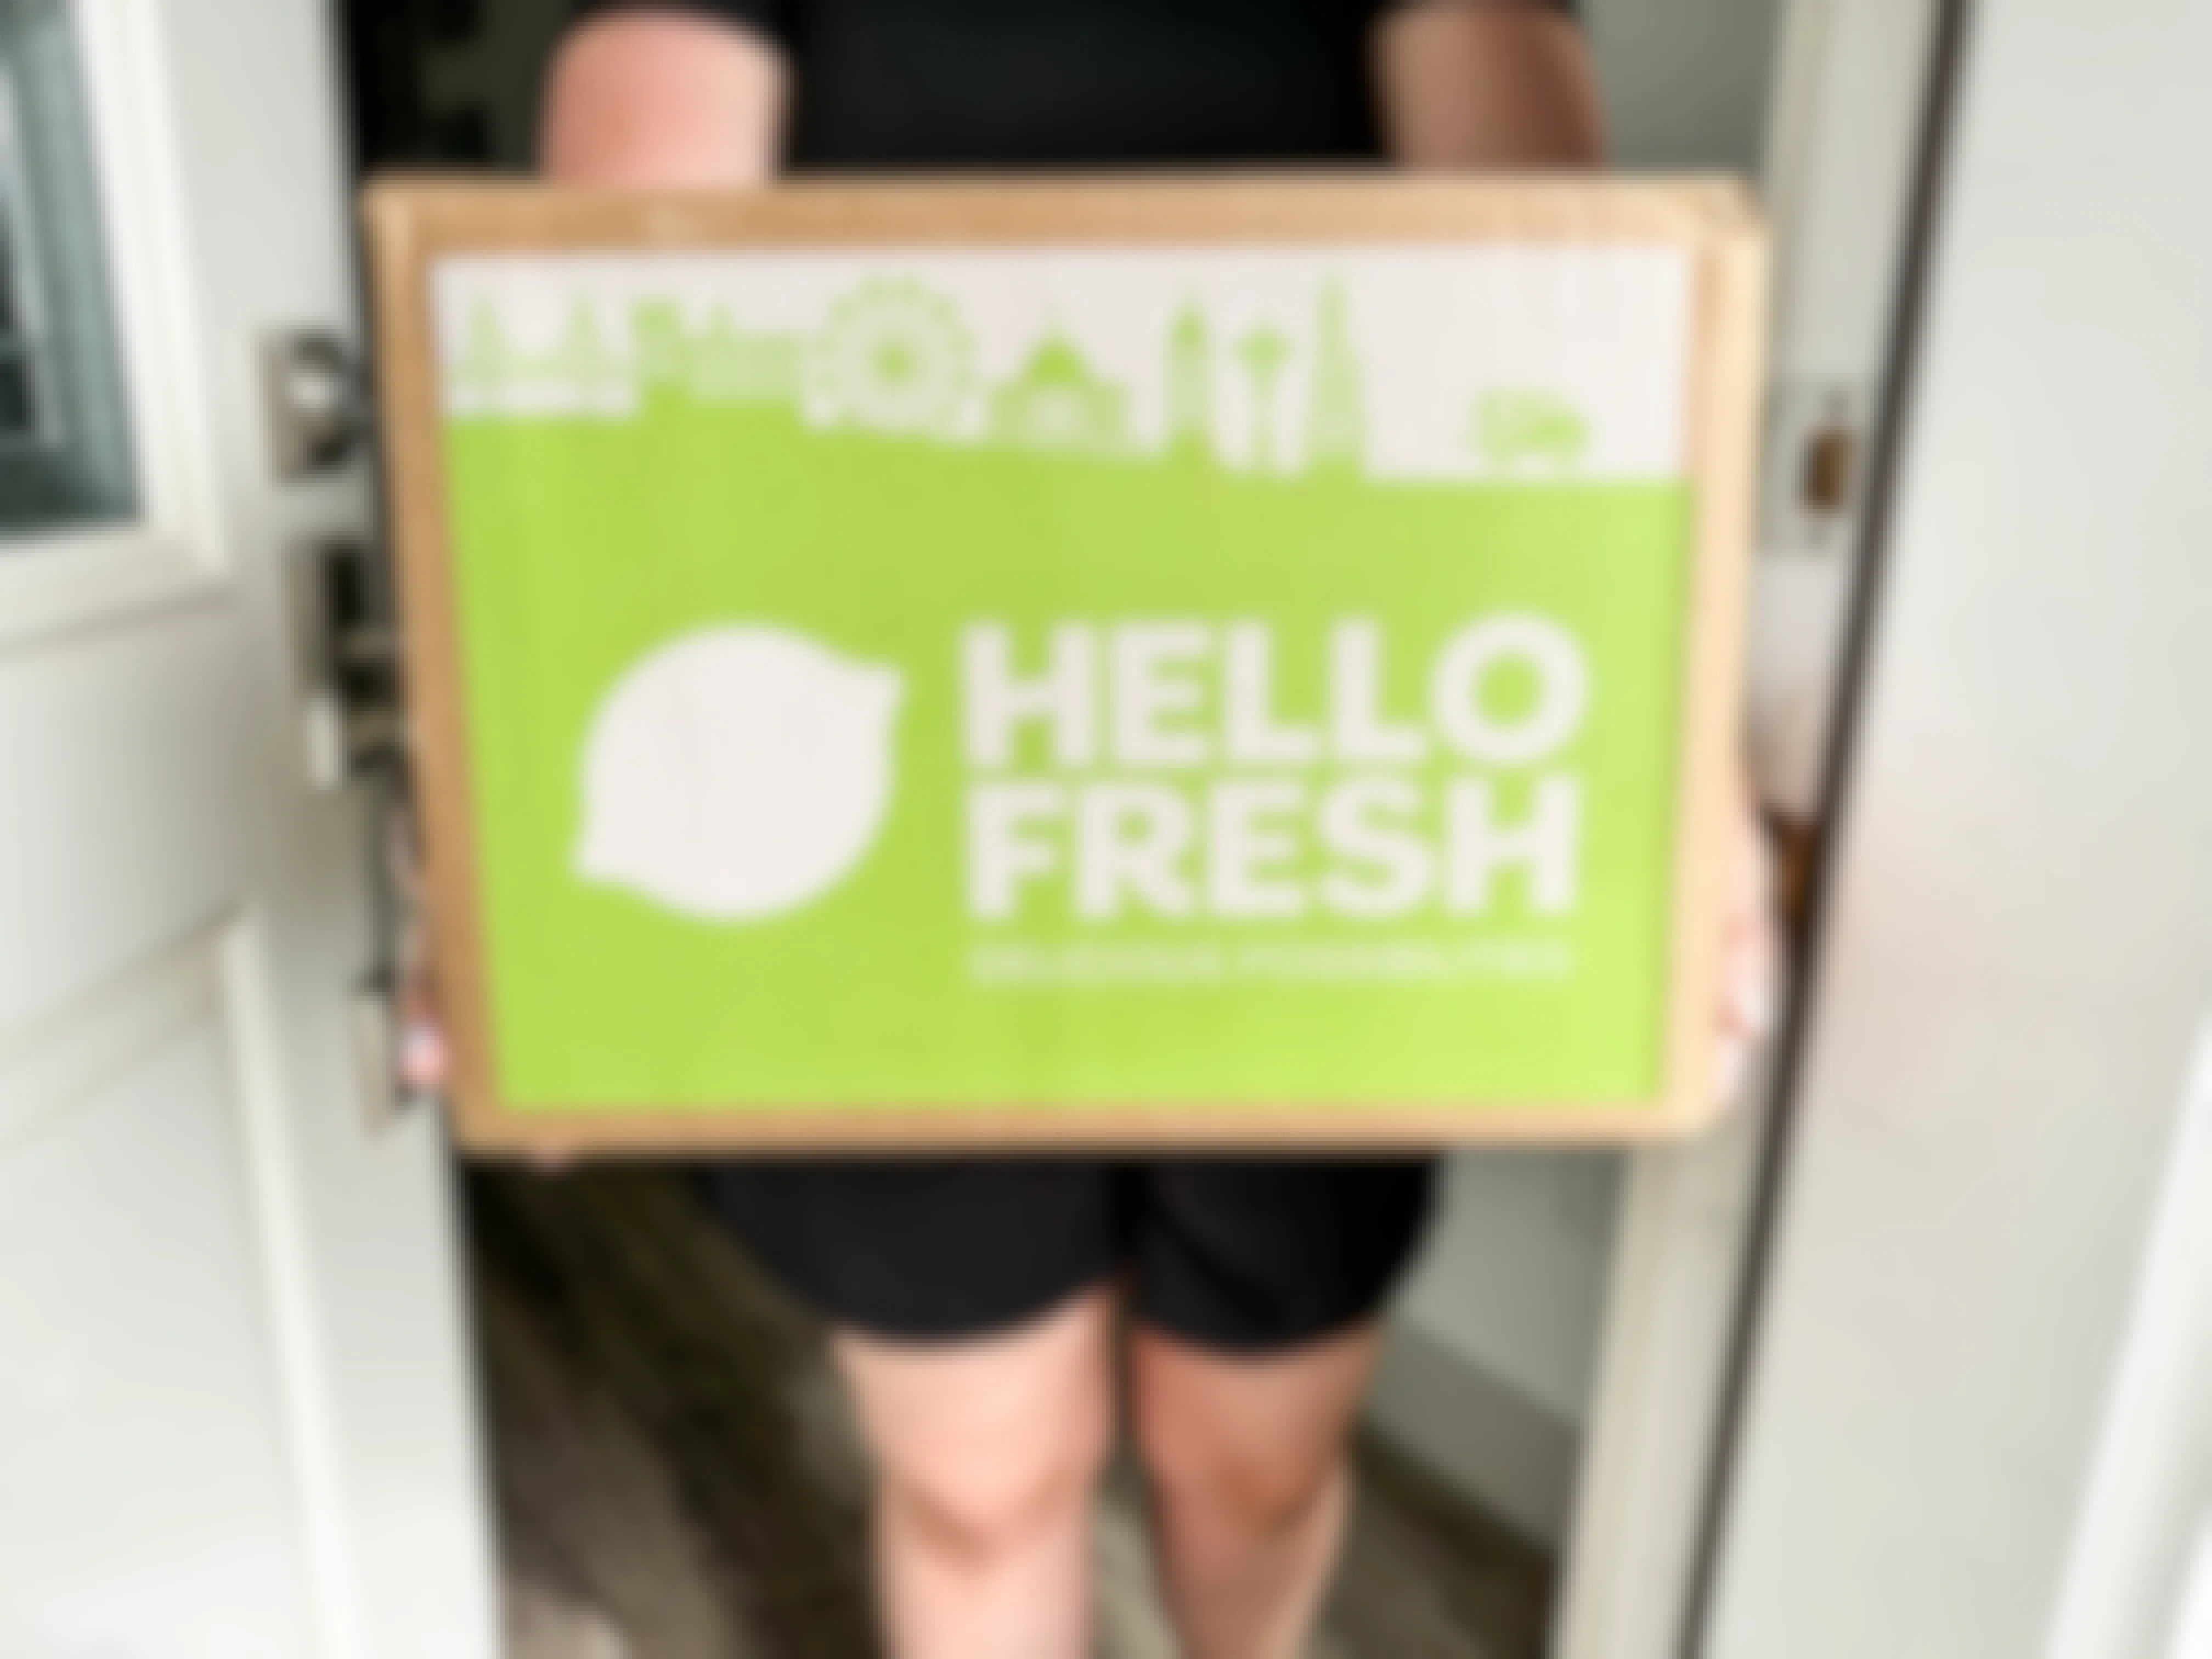 a person holding a hello fresh box in doorway